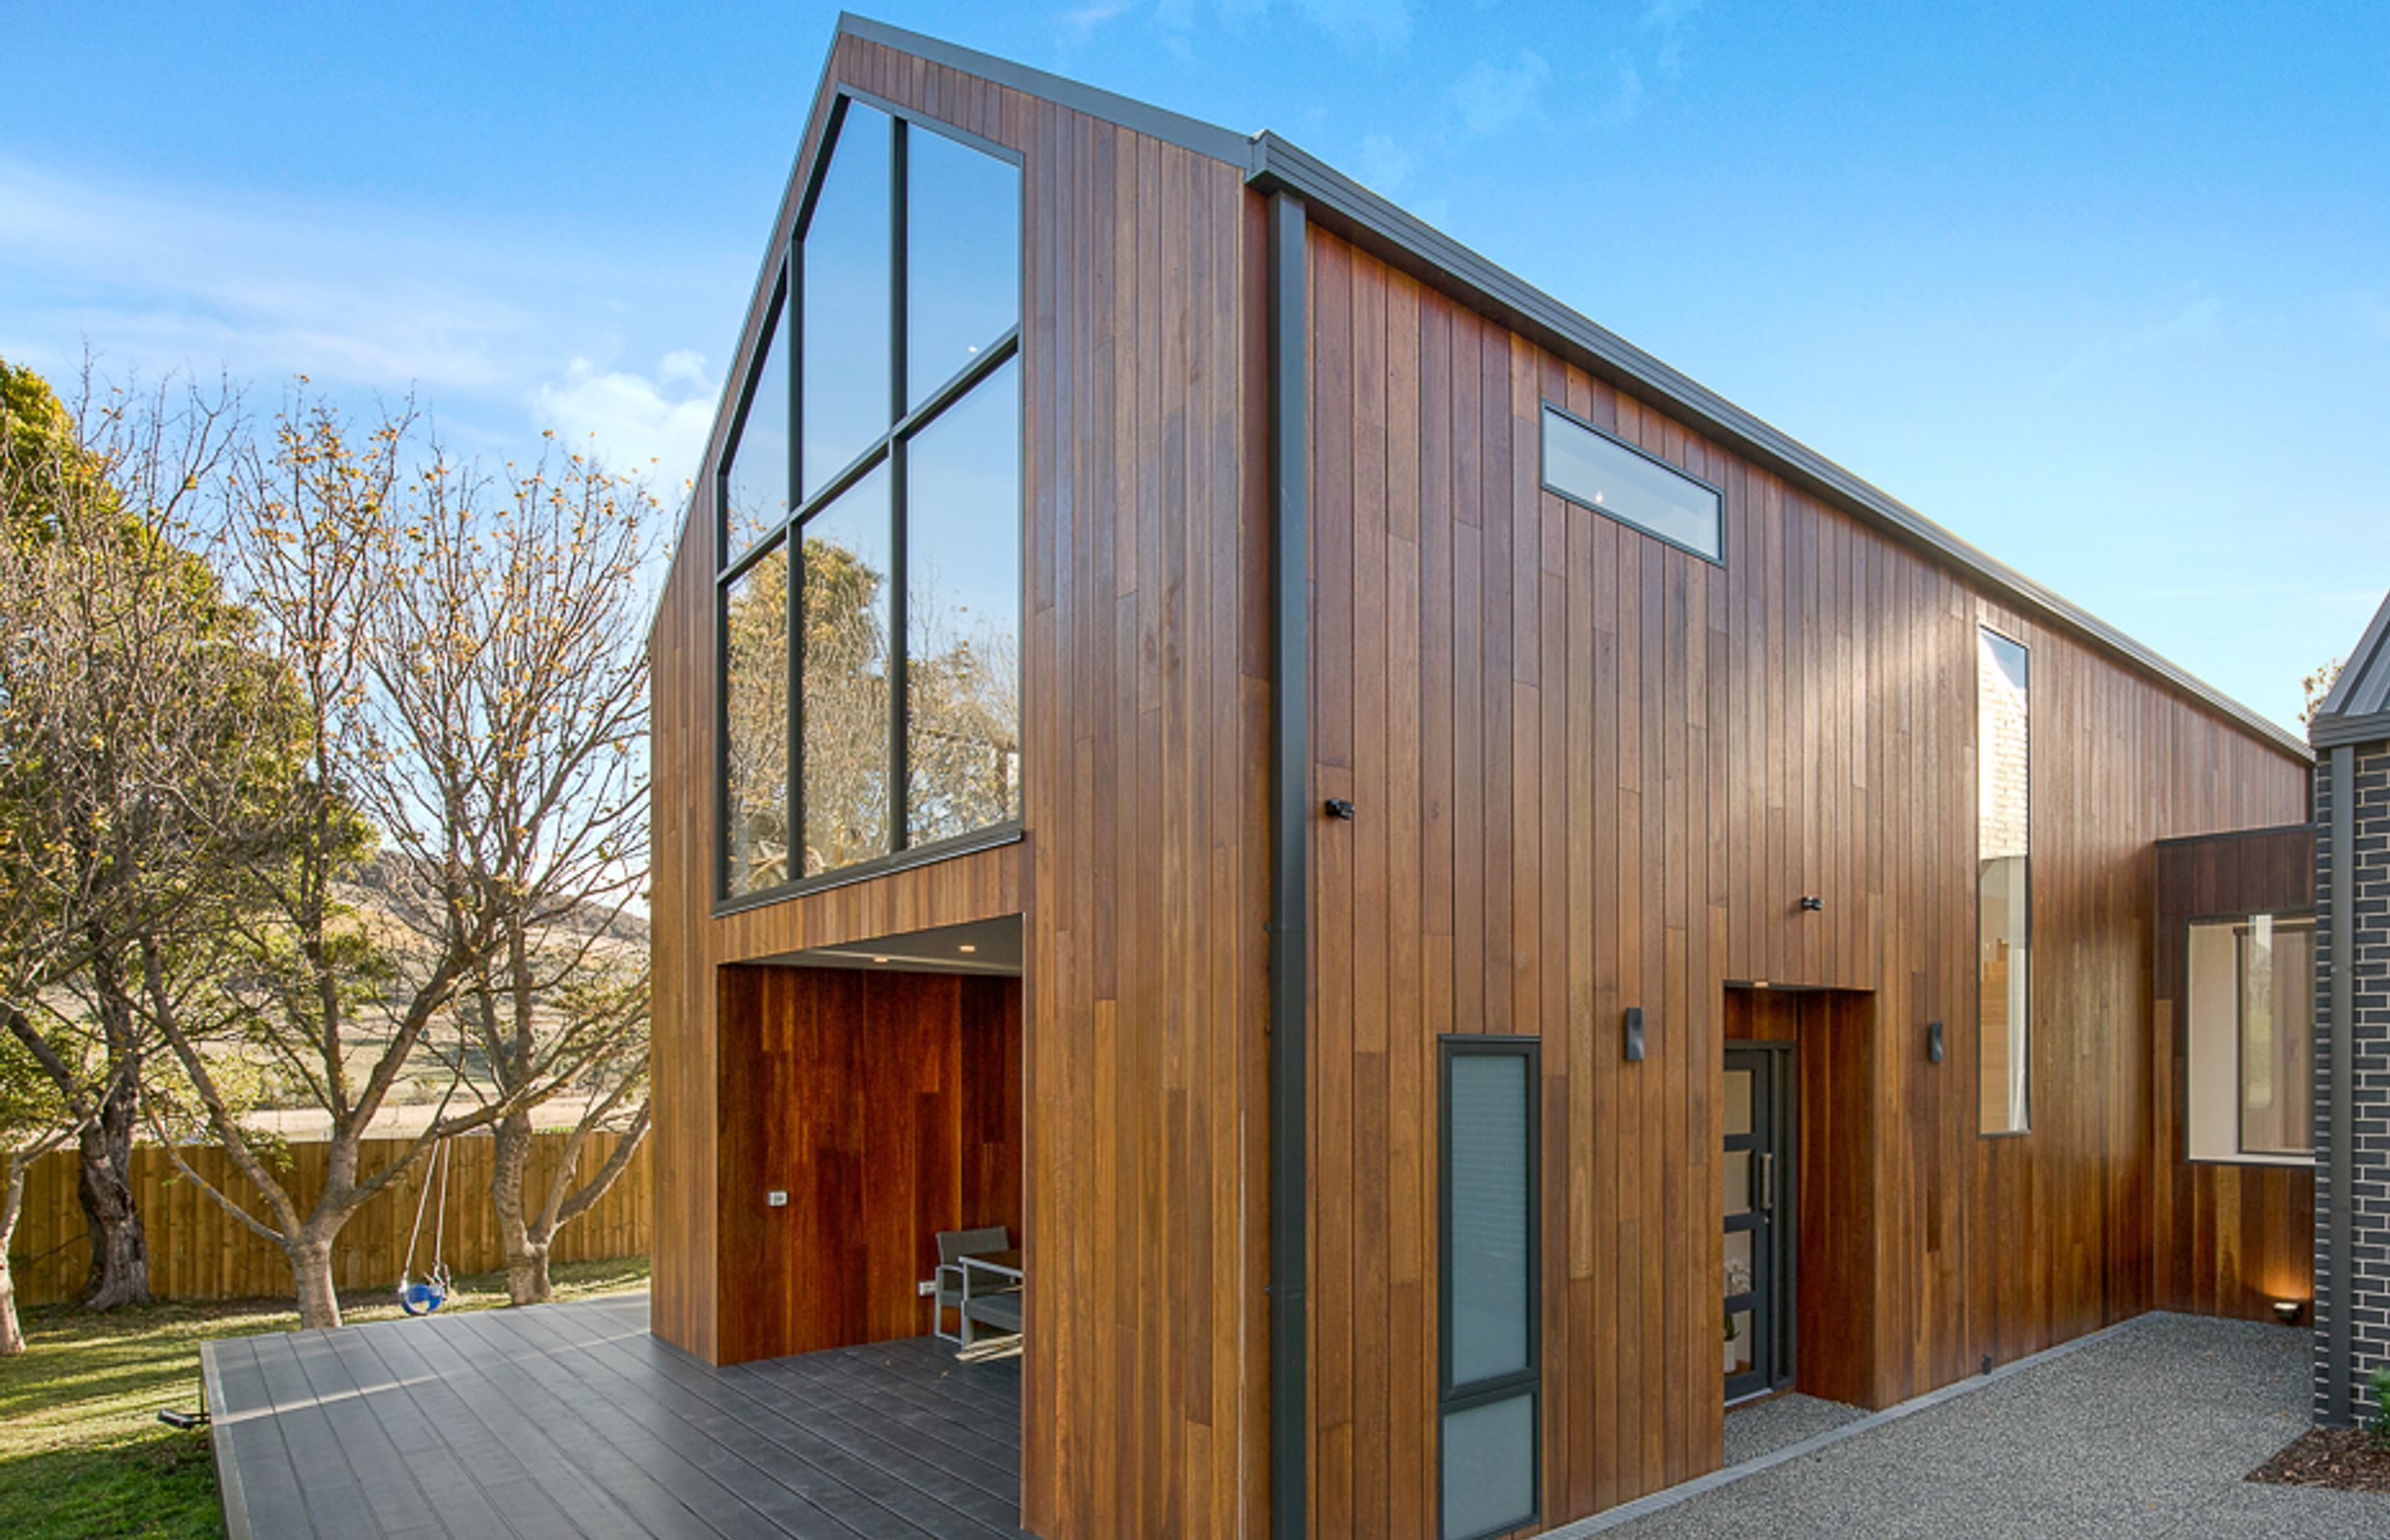 The WOOD ELEMENTS system offers both cladding and the detailed trims required to finish.